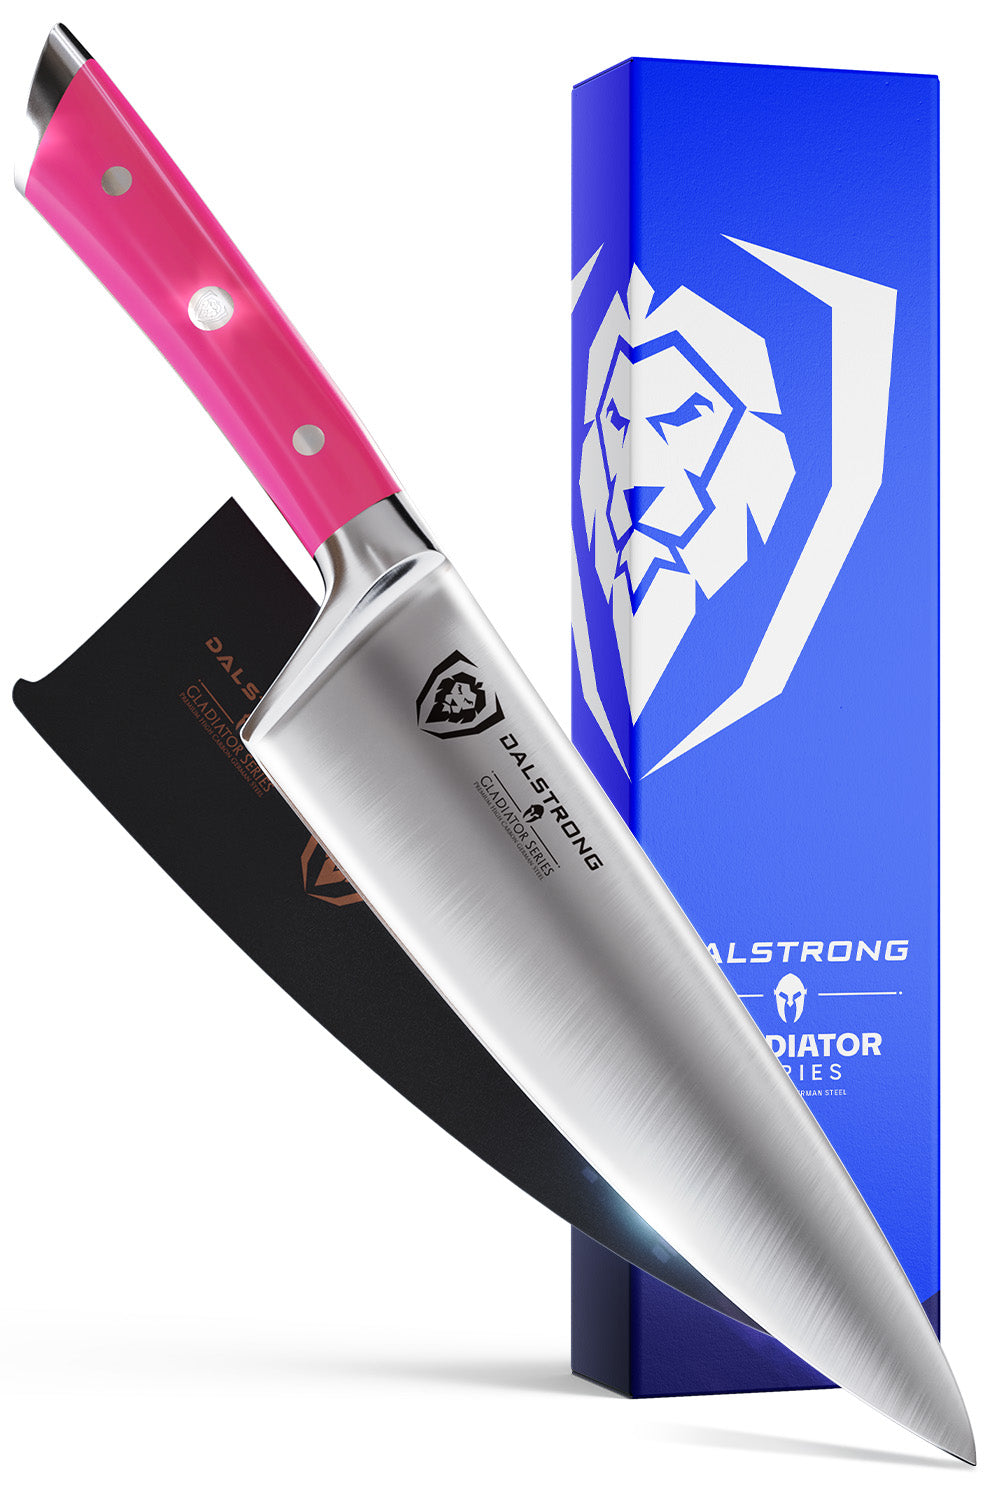 Chef Knife 8" | Fuchsia ABS Handle | Gladiator Series | NSF Certified | Dalstrong ©